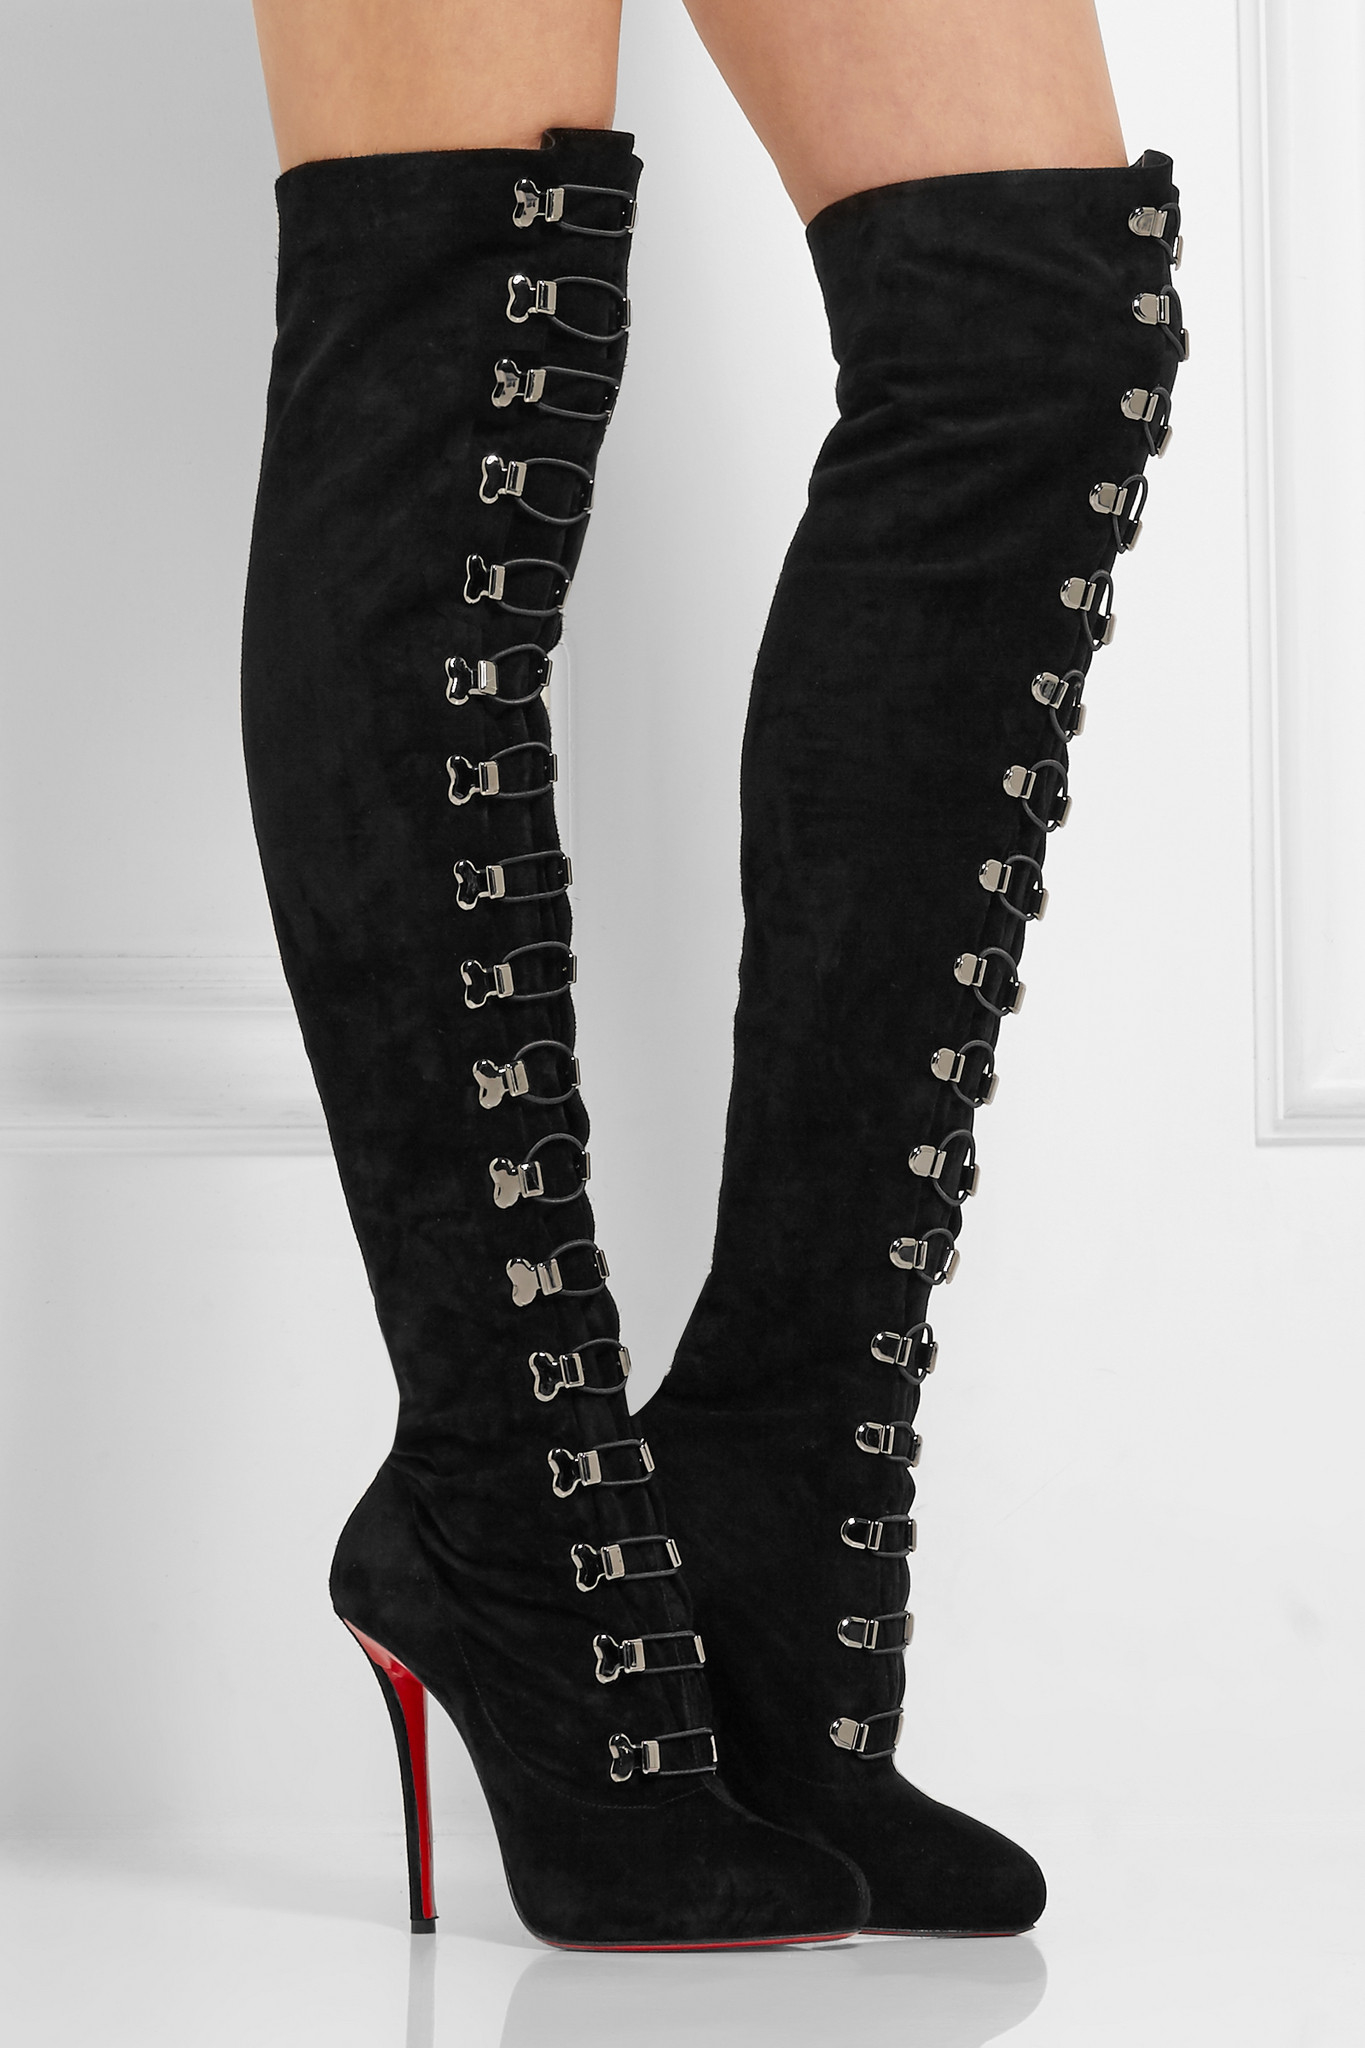 escaladrome | christian louboutin monica over the knee boots